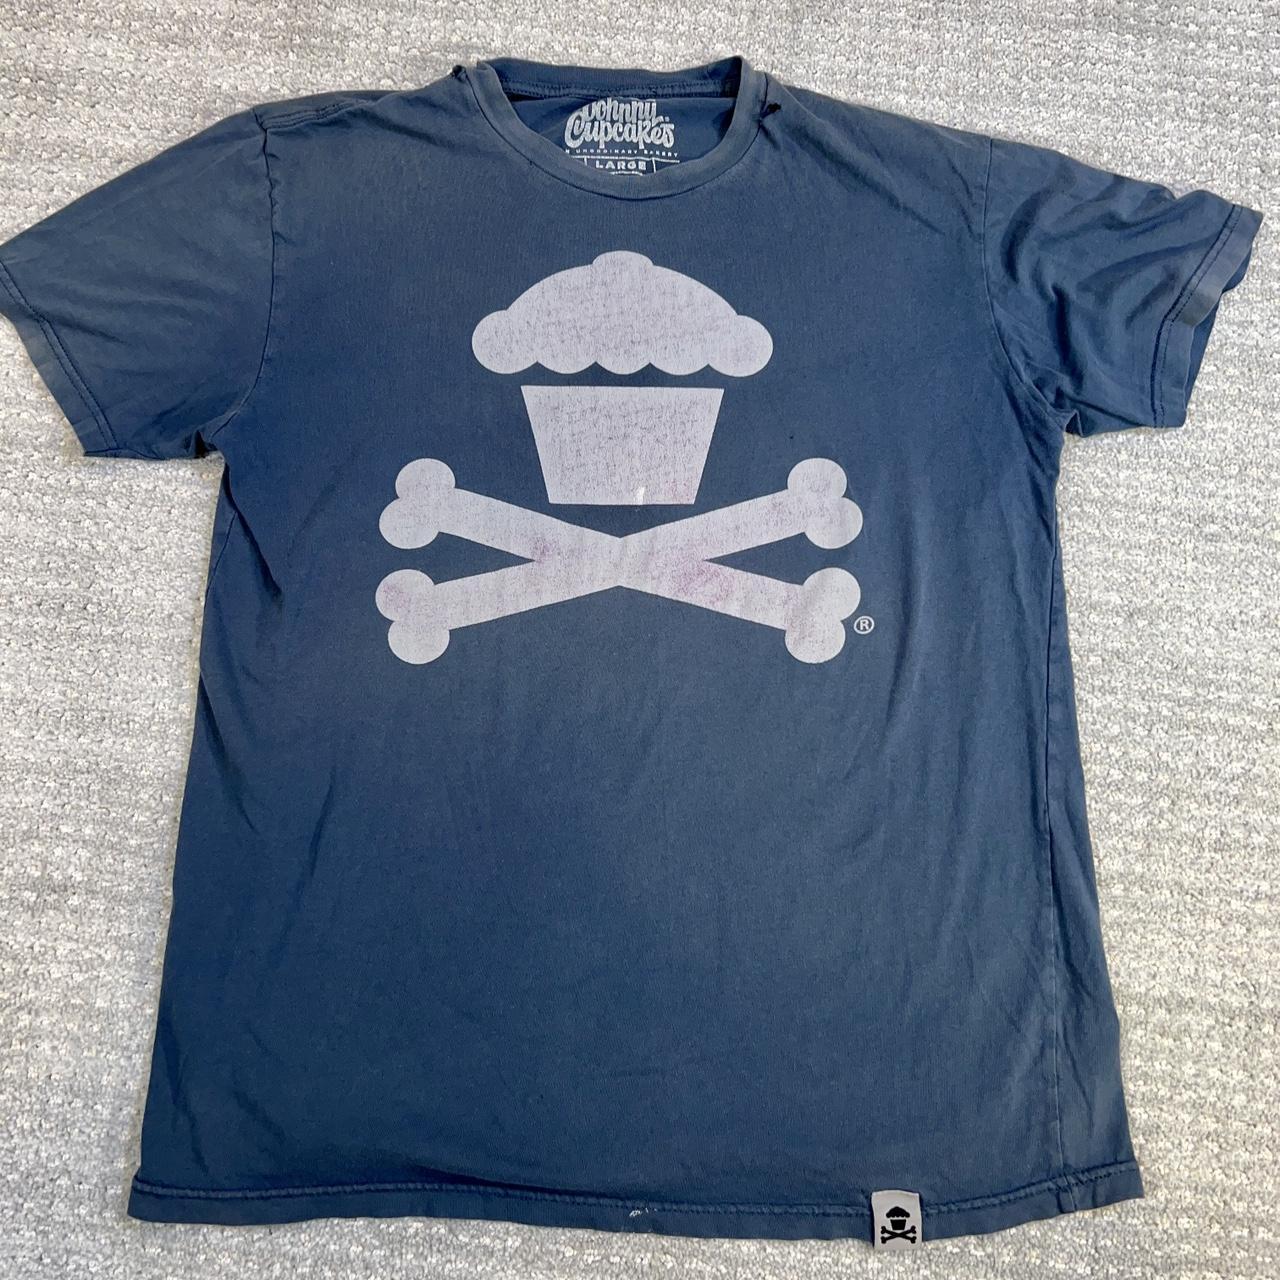 Johnny Cupcakes Men's Navy and Silver T-shirt